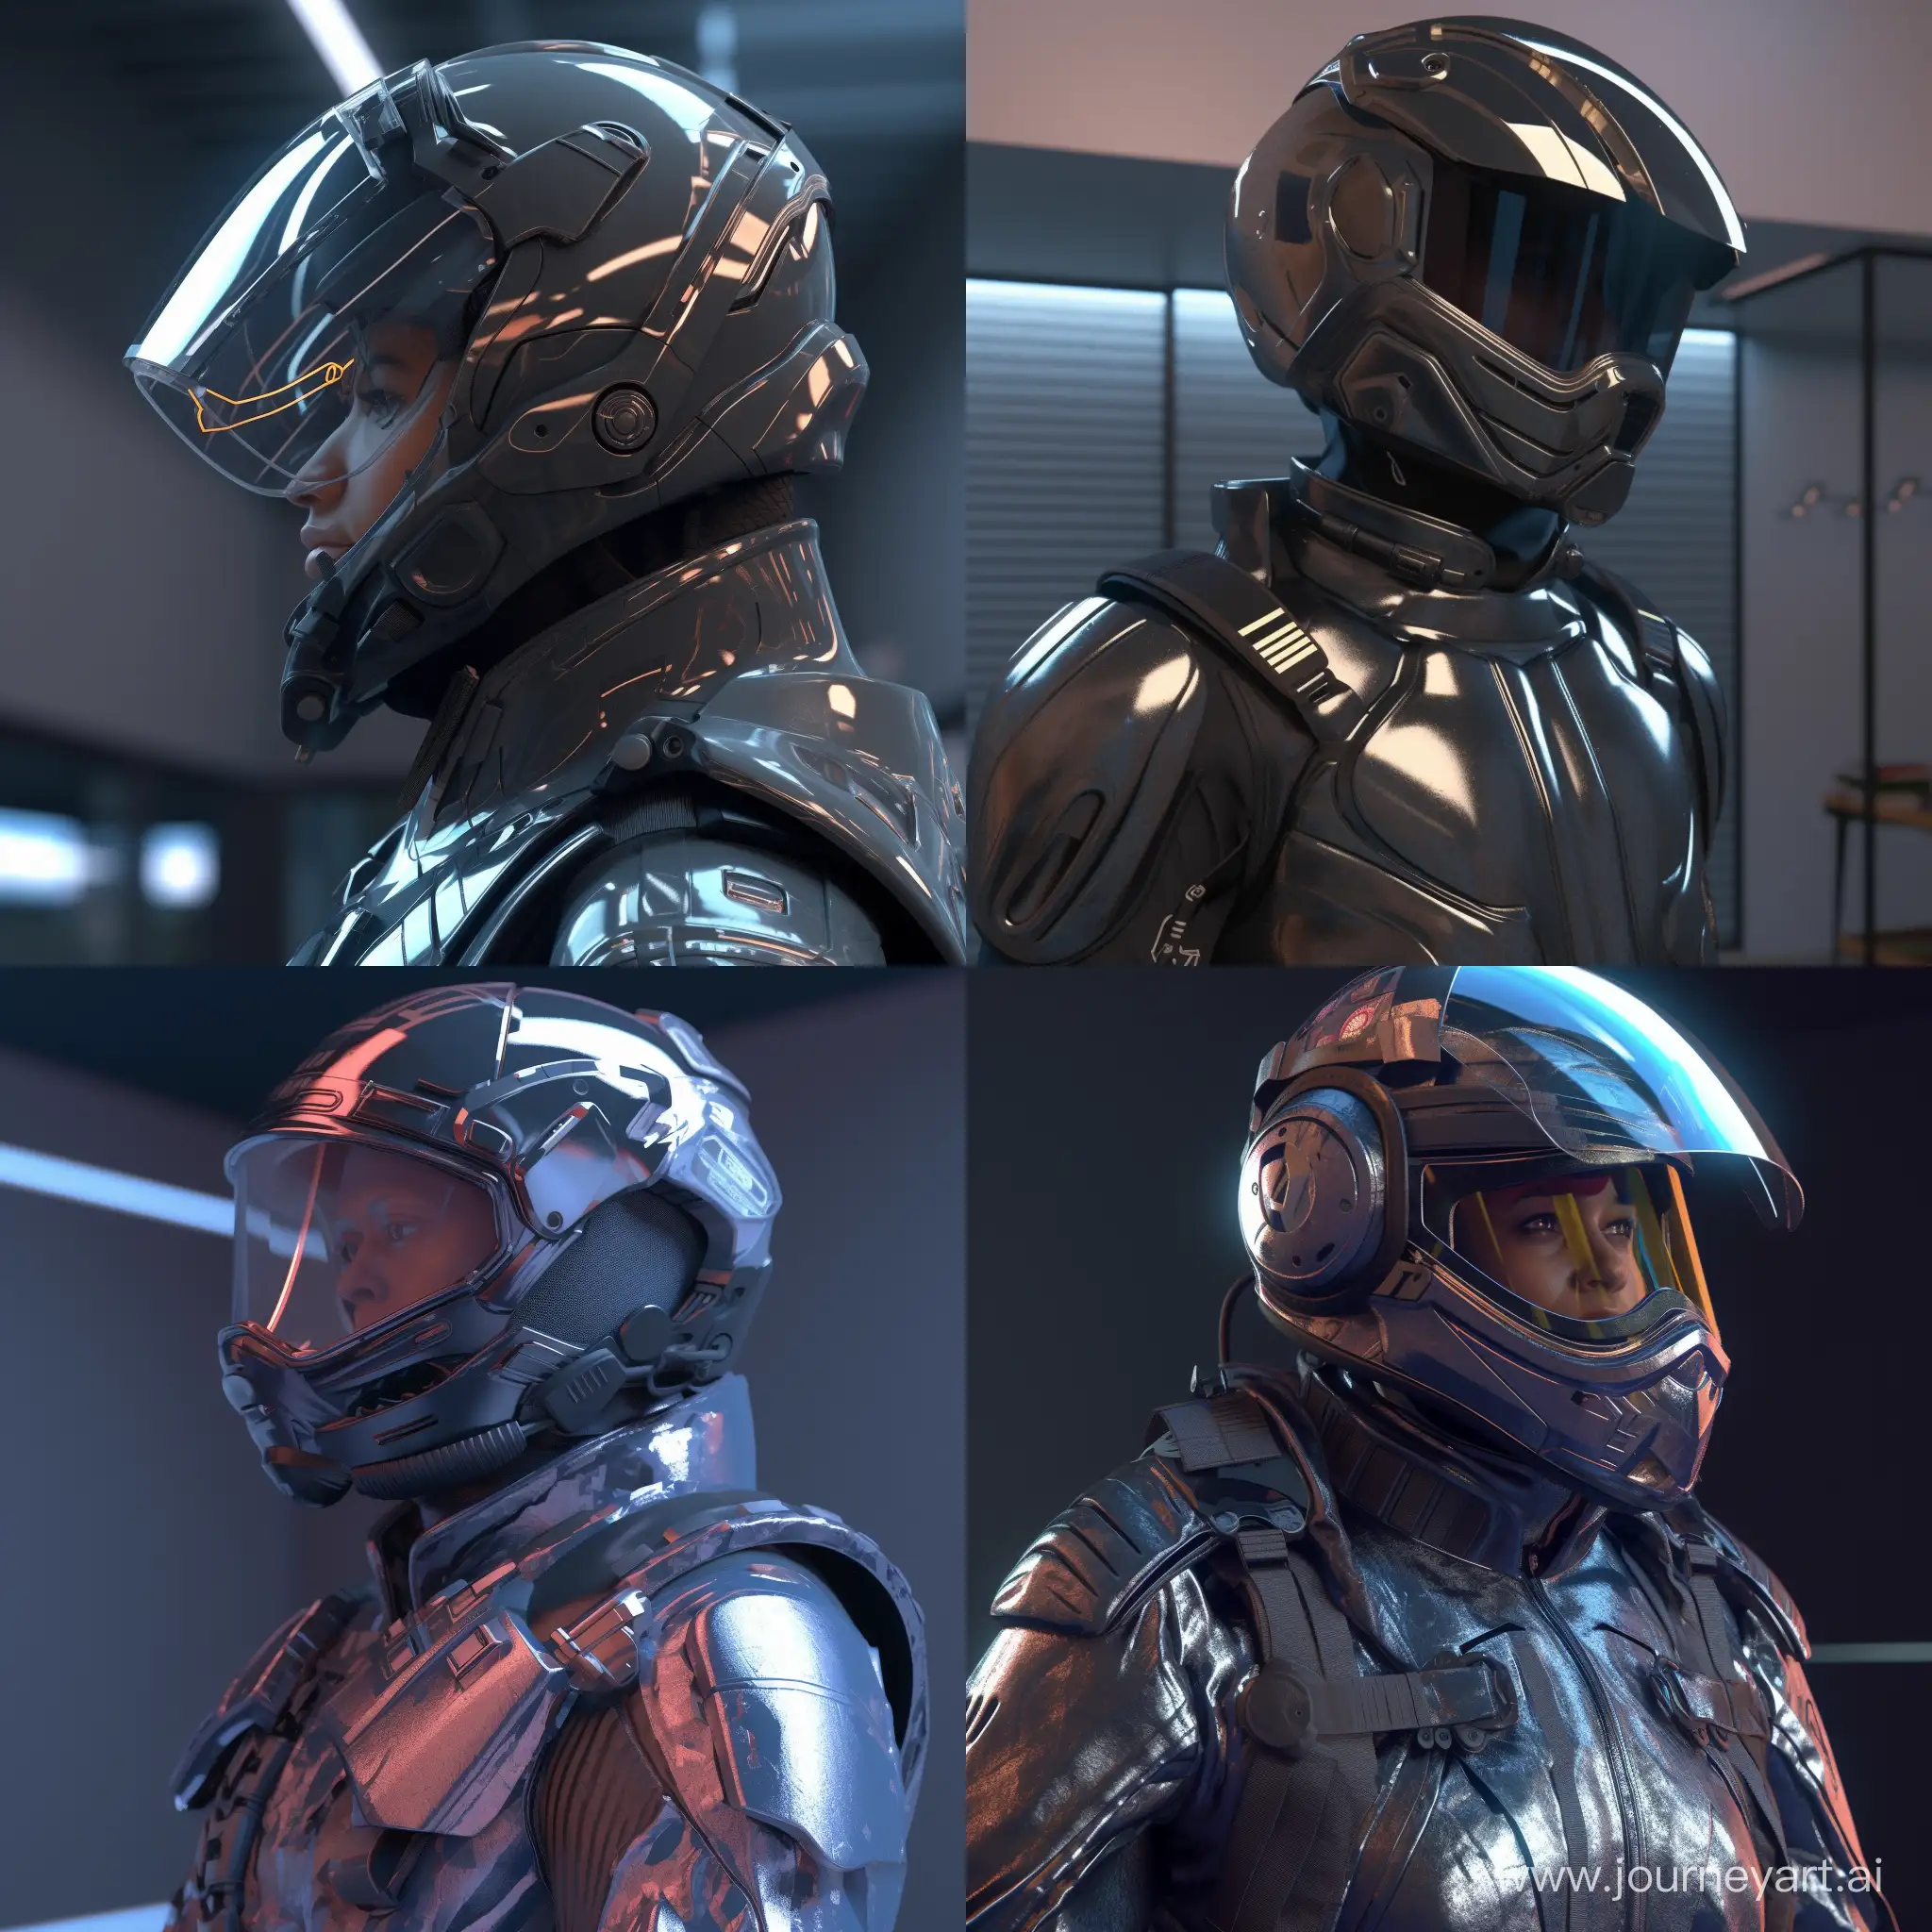  Futurism 8K beautiful octane render reflections shadows 8K 3D daft punk insane details 8k character concept realism night unreal engine 5 hyperrealism character concept high resolution micro details futuristic super detailed 3d sculpture a man in dark, voluminous, futuristic clothes, in an ultra-technological high-tech helmet with a large dark tinted visor, anamorphic lens, ultra realistic, hyber detailed, fashioncore, modelcore, portrait photo captured Mario Testino. use sony a7 II camera with an 30mm lens fat F.1.2 aperture setting to blur the background and isolate the subject. use distinctive lighting on the subject’s shot. The image should be shot in ultra-high resolution. Use the Midjourney v5 with photorealism mode turned on to create an ultra-realistic image, 8k, --ar 1:1 --v 5